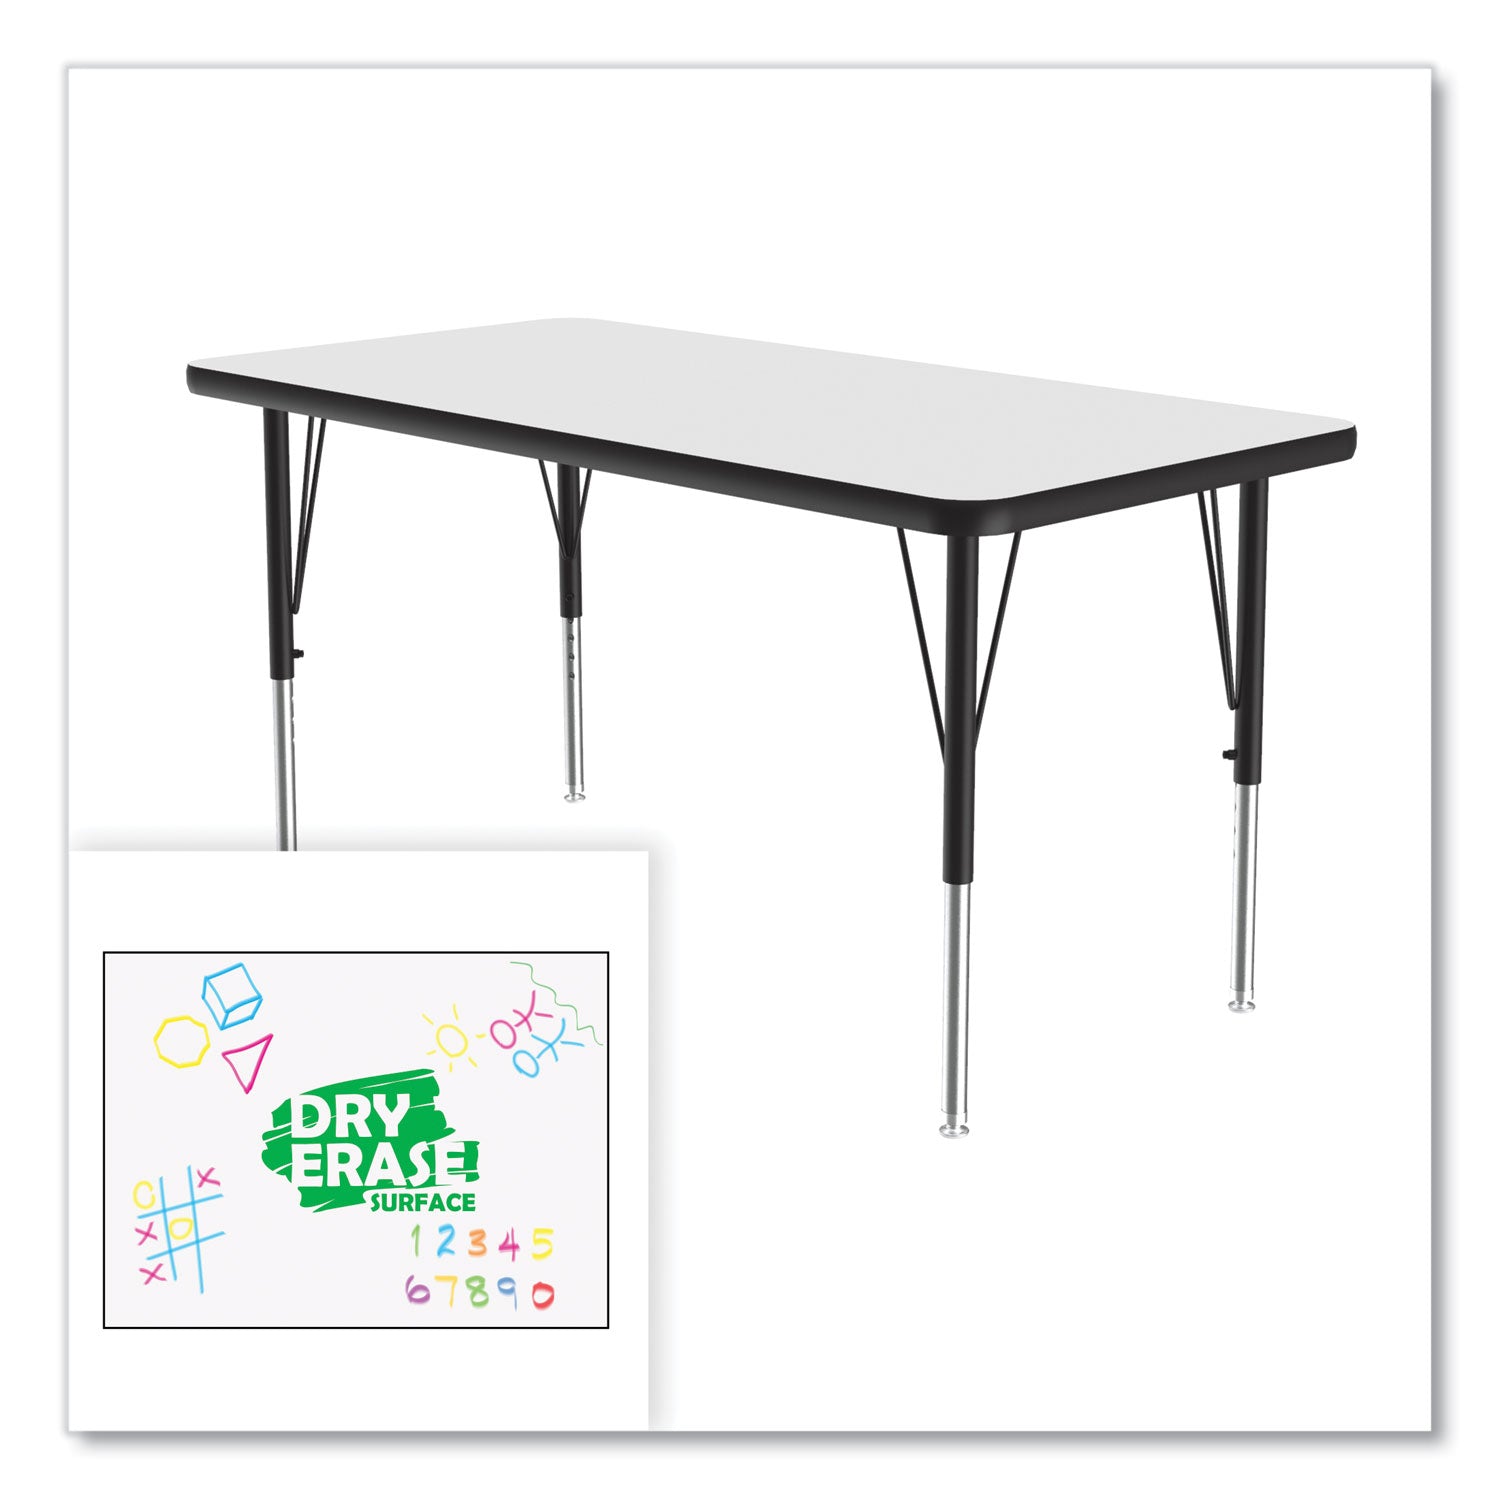 markerboard-activity-tables-rectangular-48-x-24-x-19-to-29-white-top-black-legs-4-pallet-ships-in-4-6-business-days_crl2448de80954p - 3